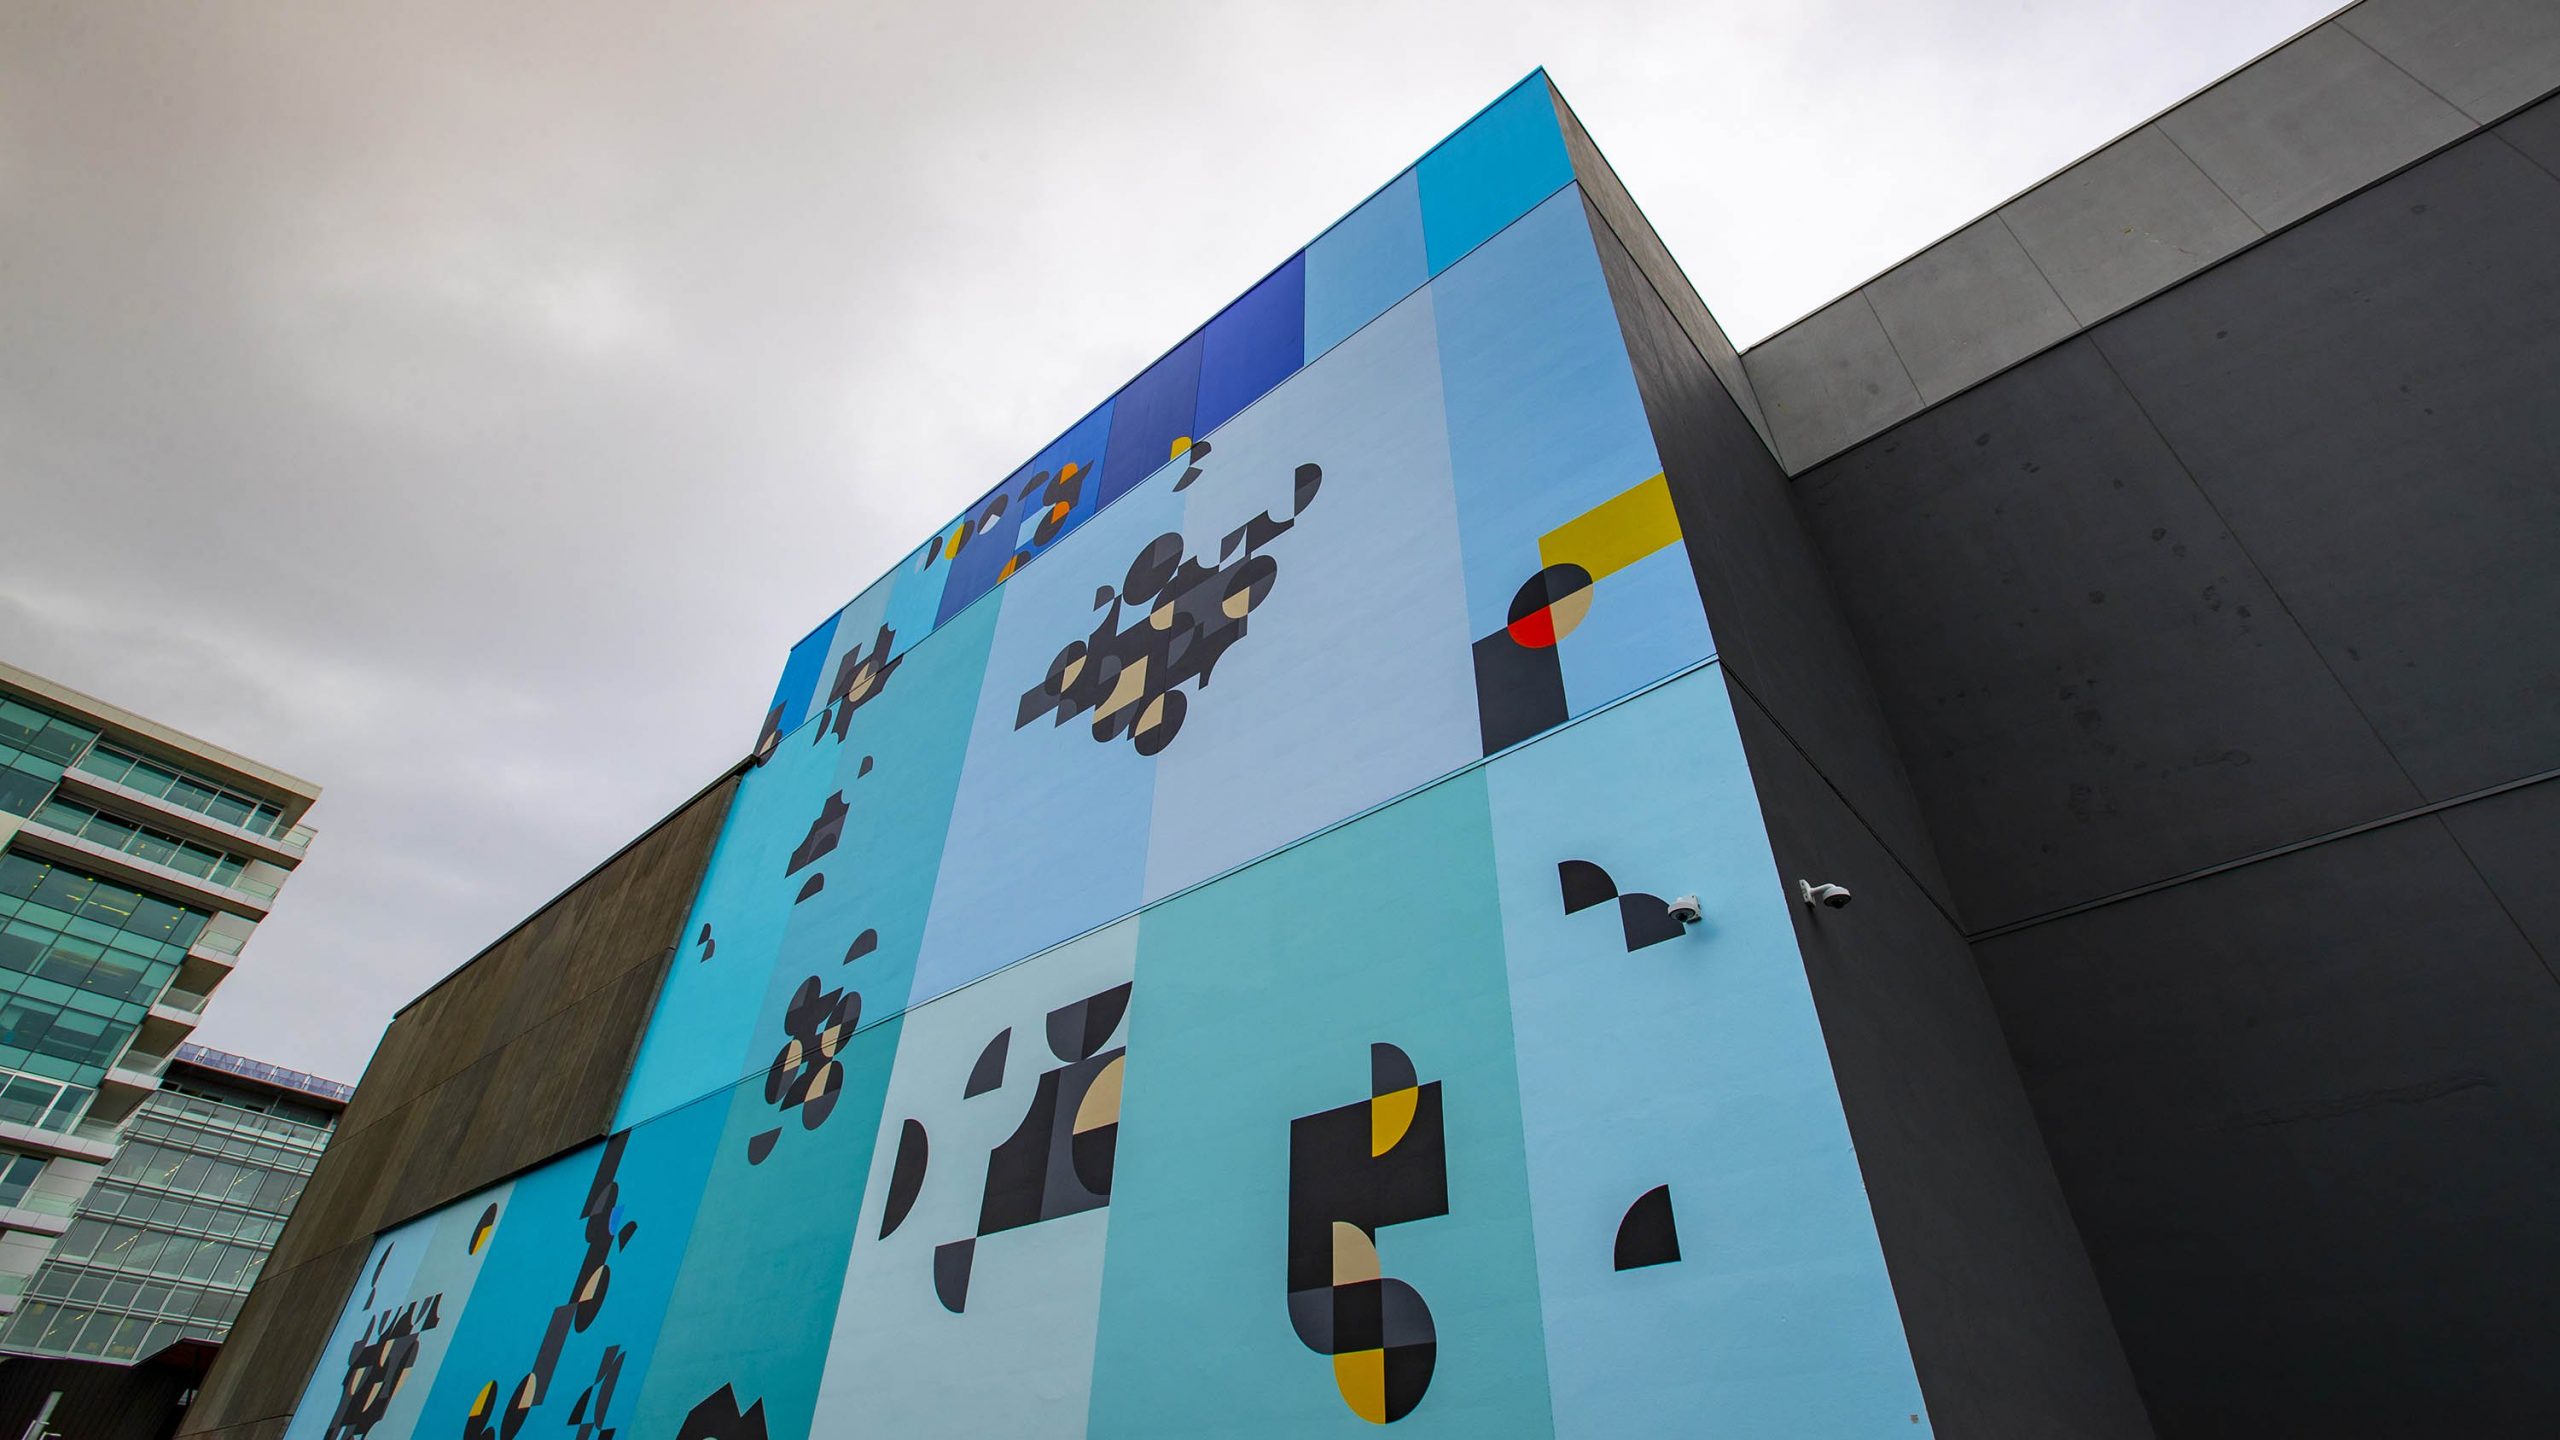 Giant wall painting marks opening of new art exhibition : Newsline